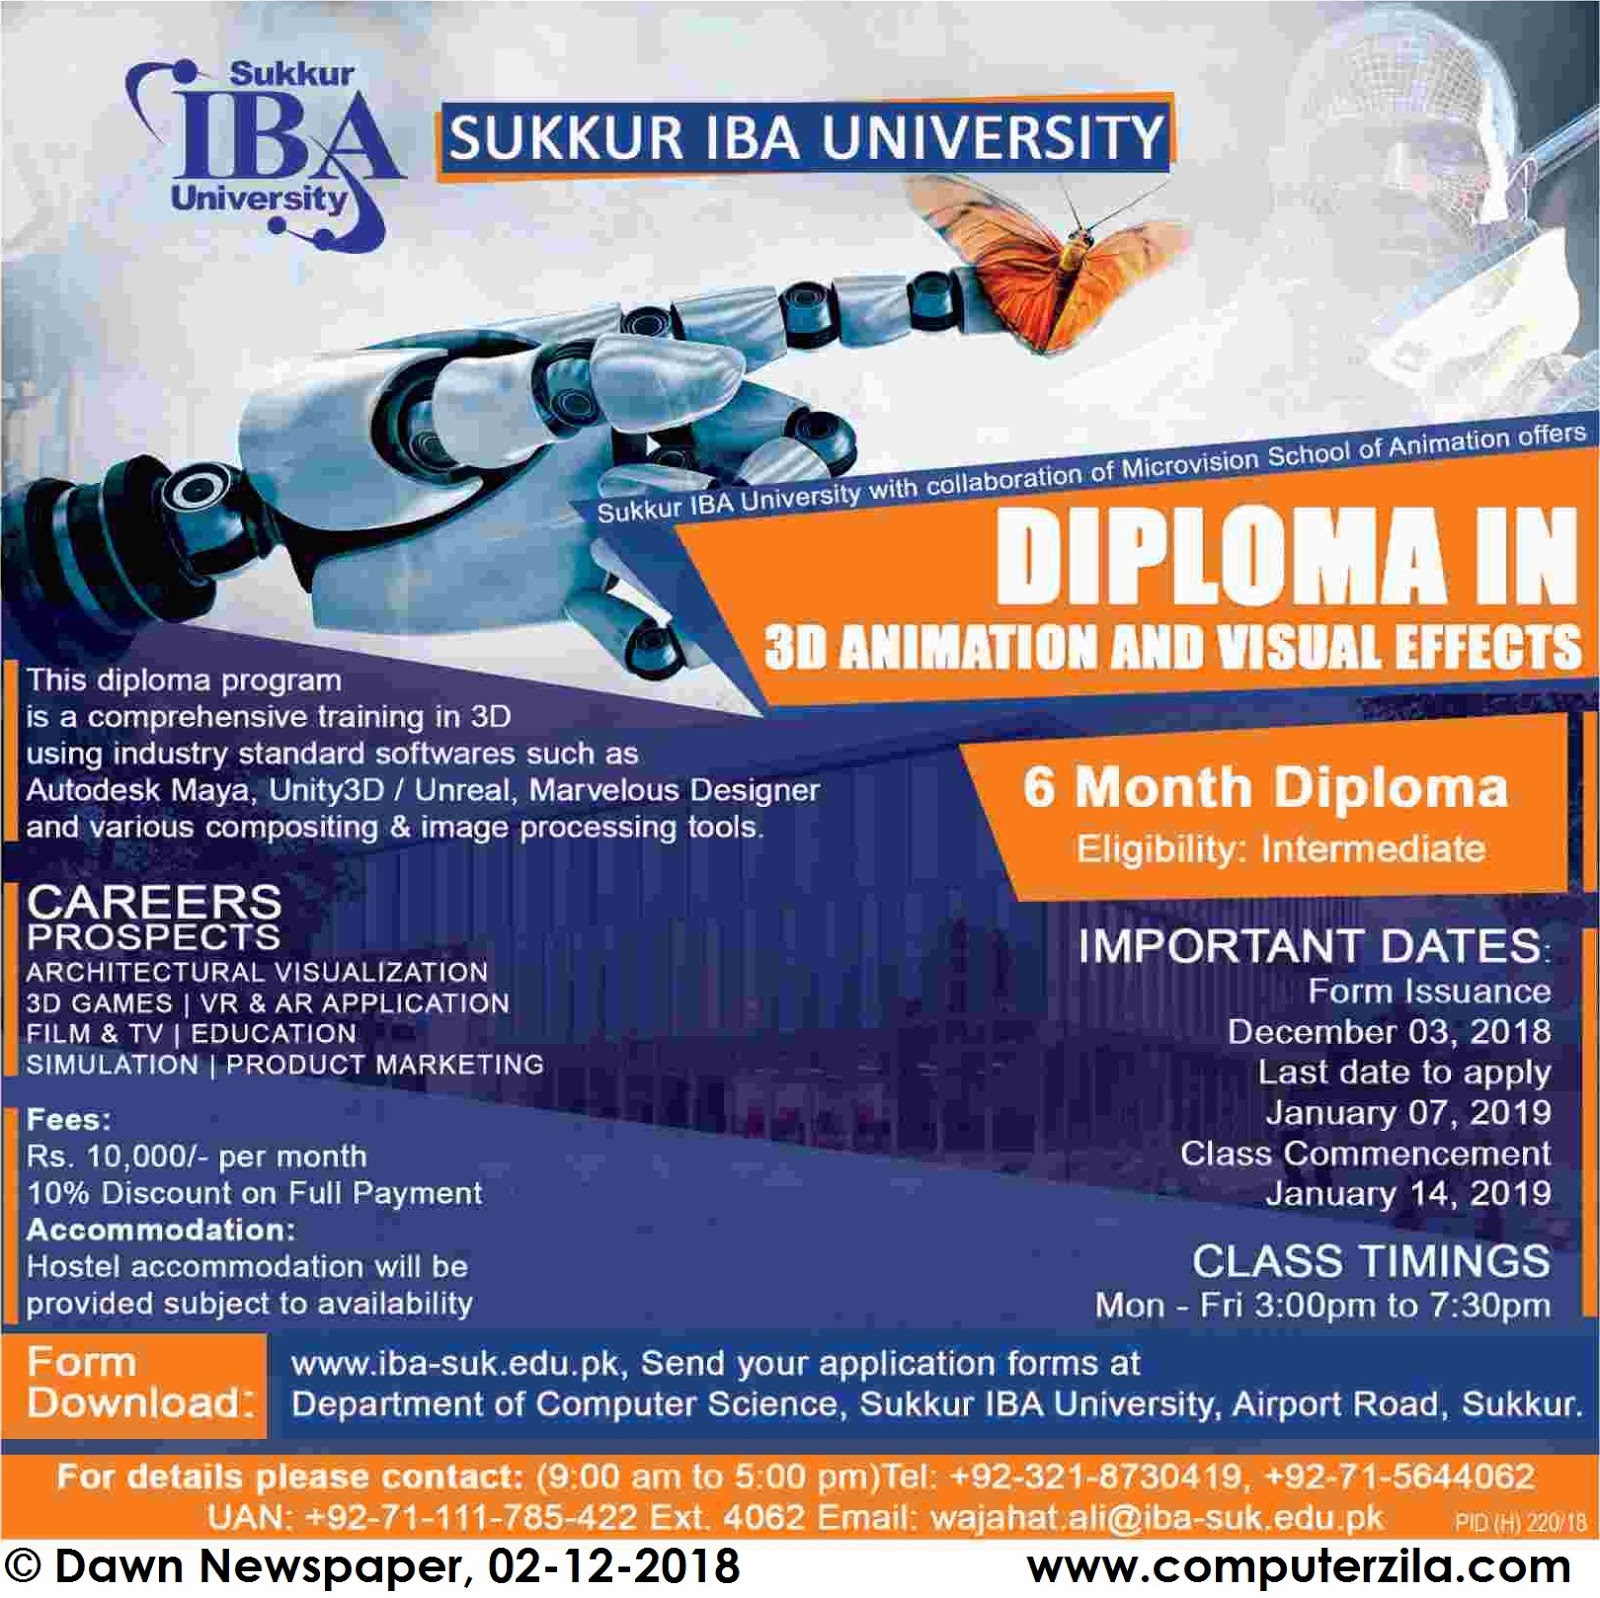 Admissions Open For Spring 2019 At SUKIBA Sukkur Campus